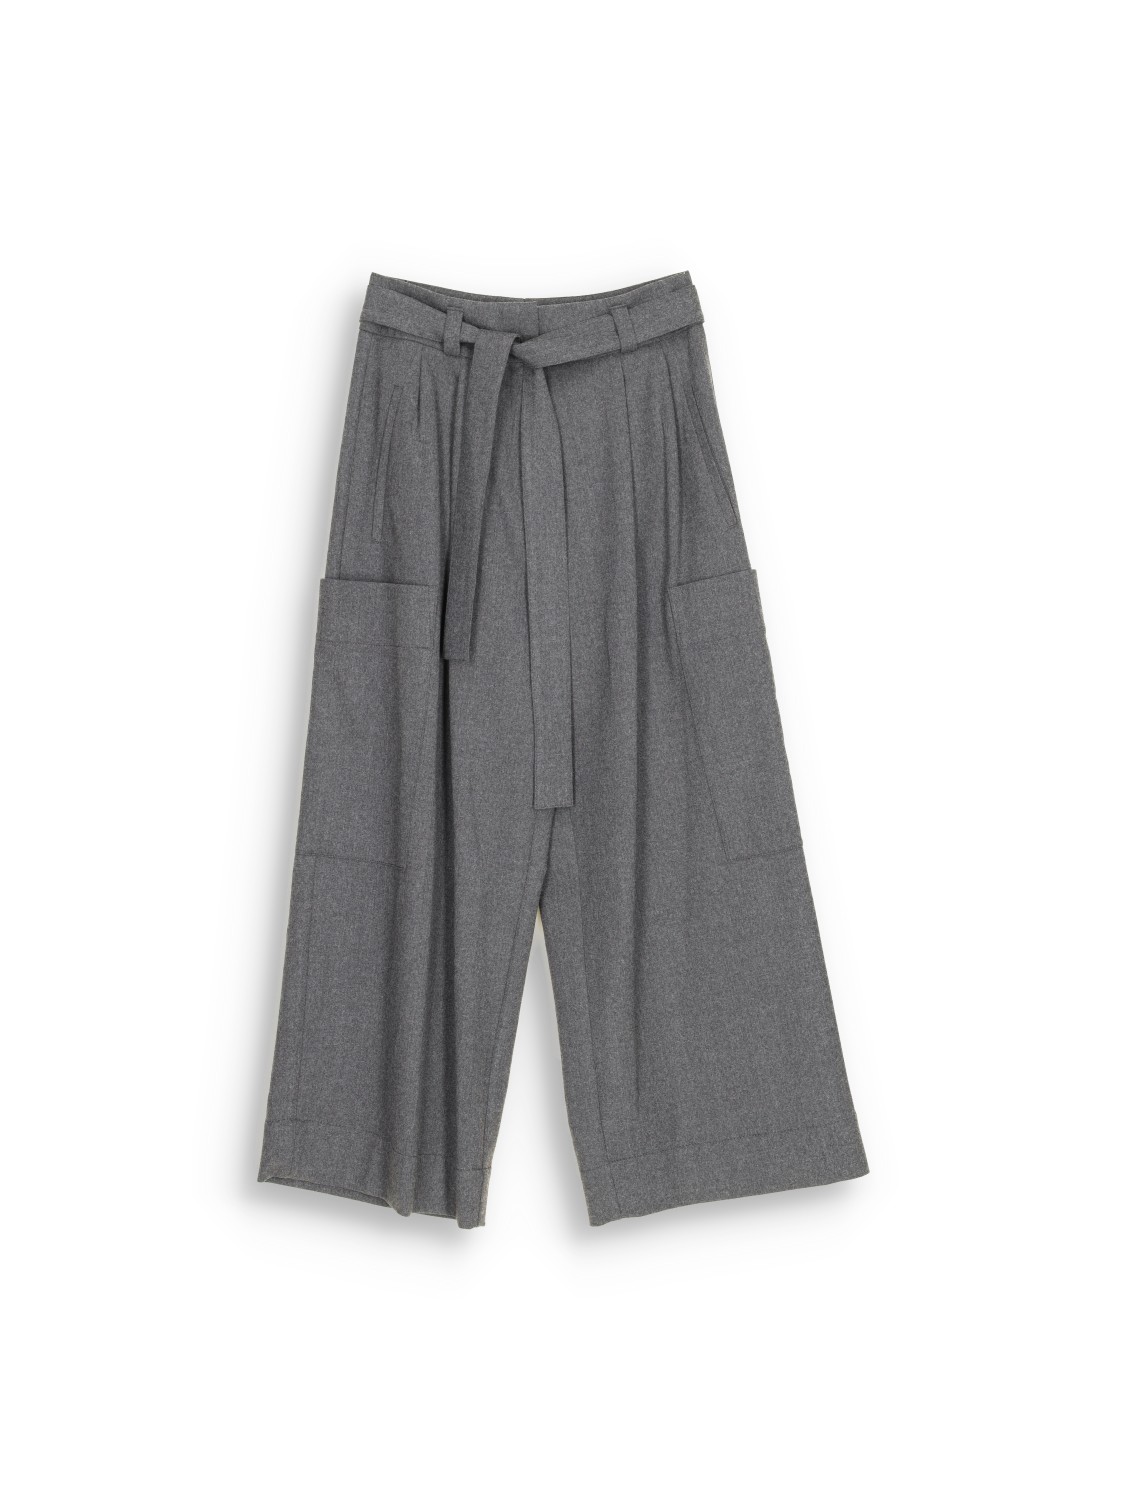 3/4 pants with side pockets made of virgin wool